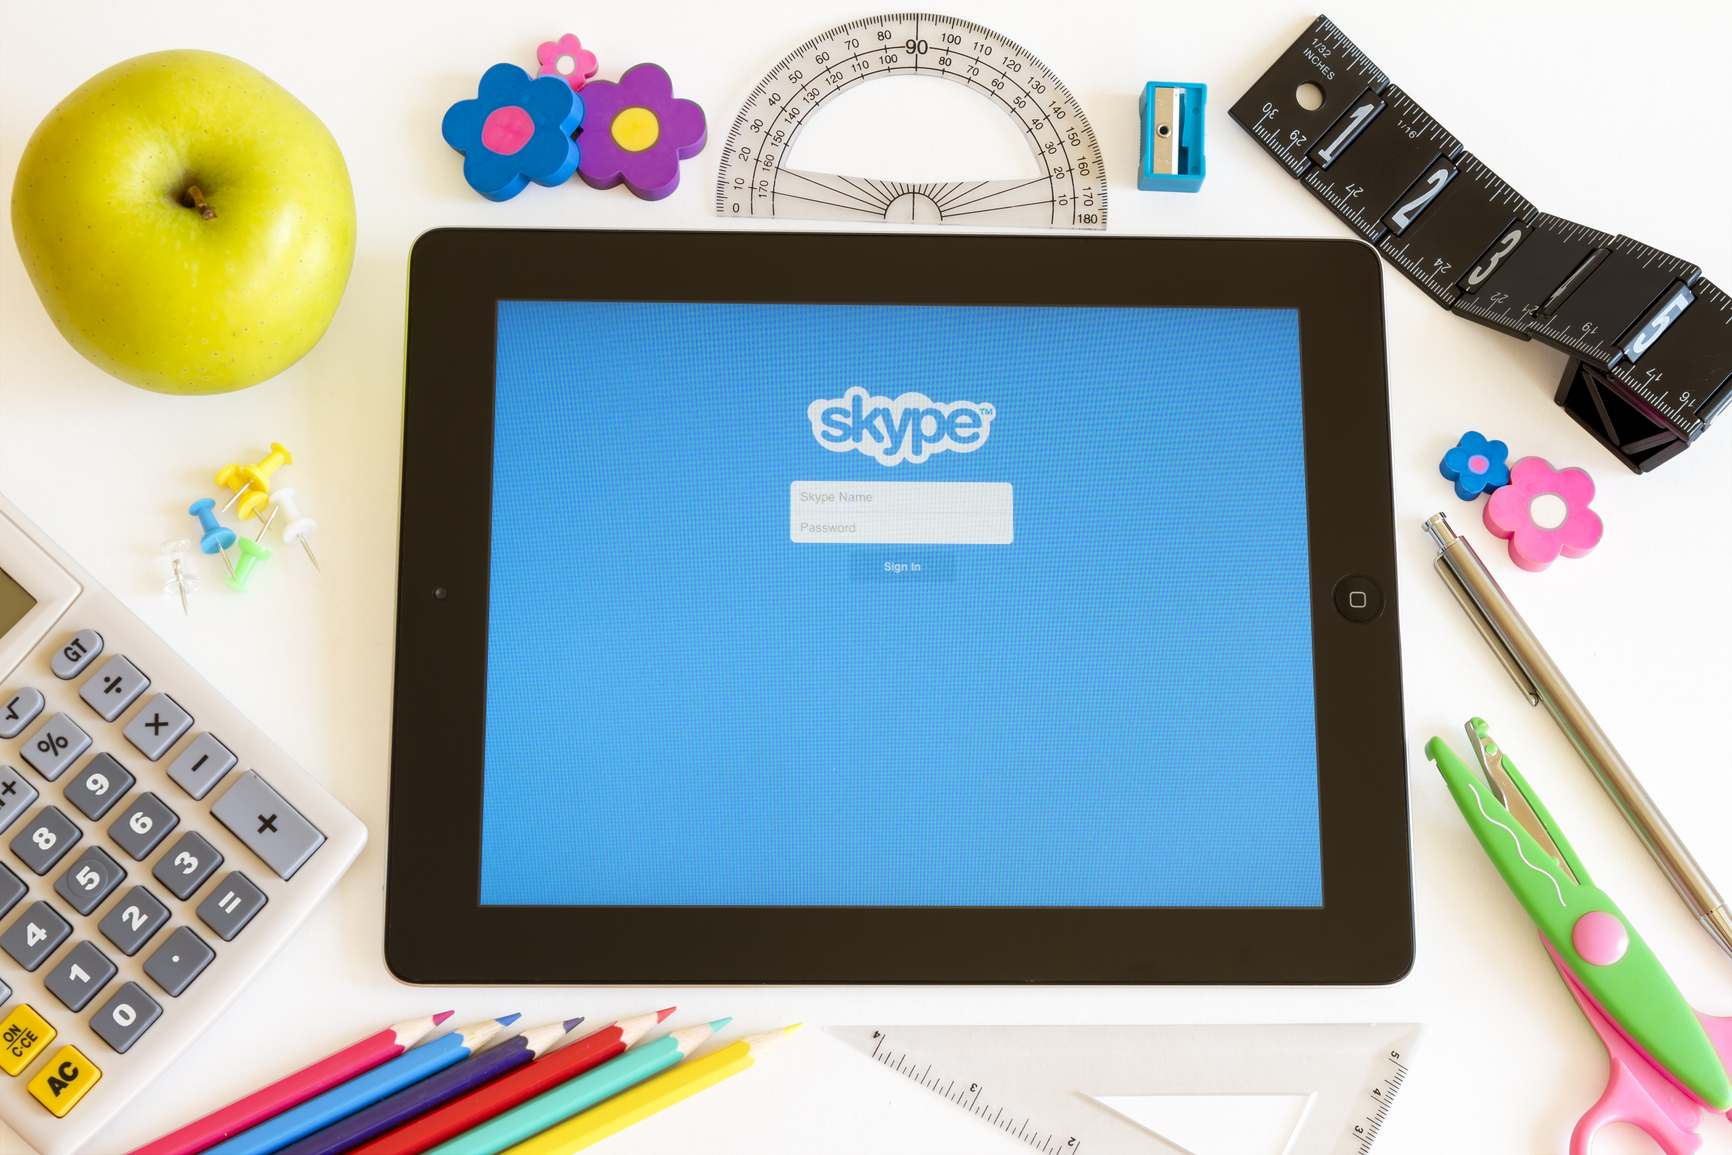 skype technologies problems today